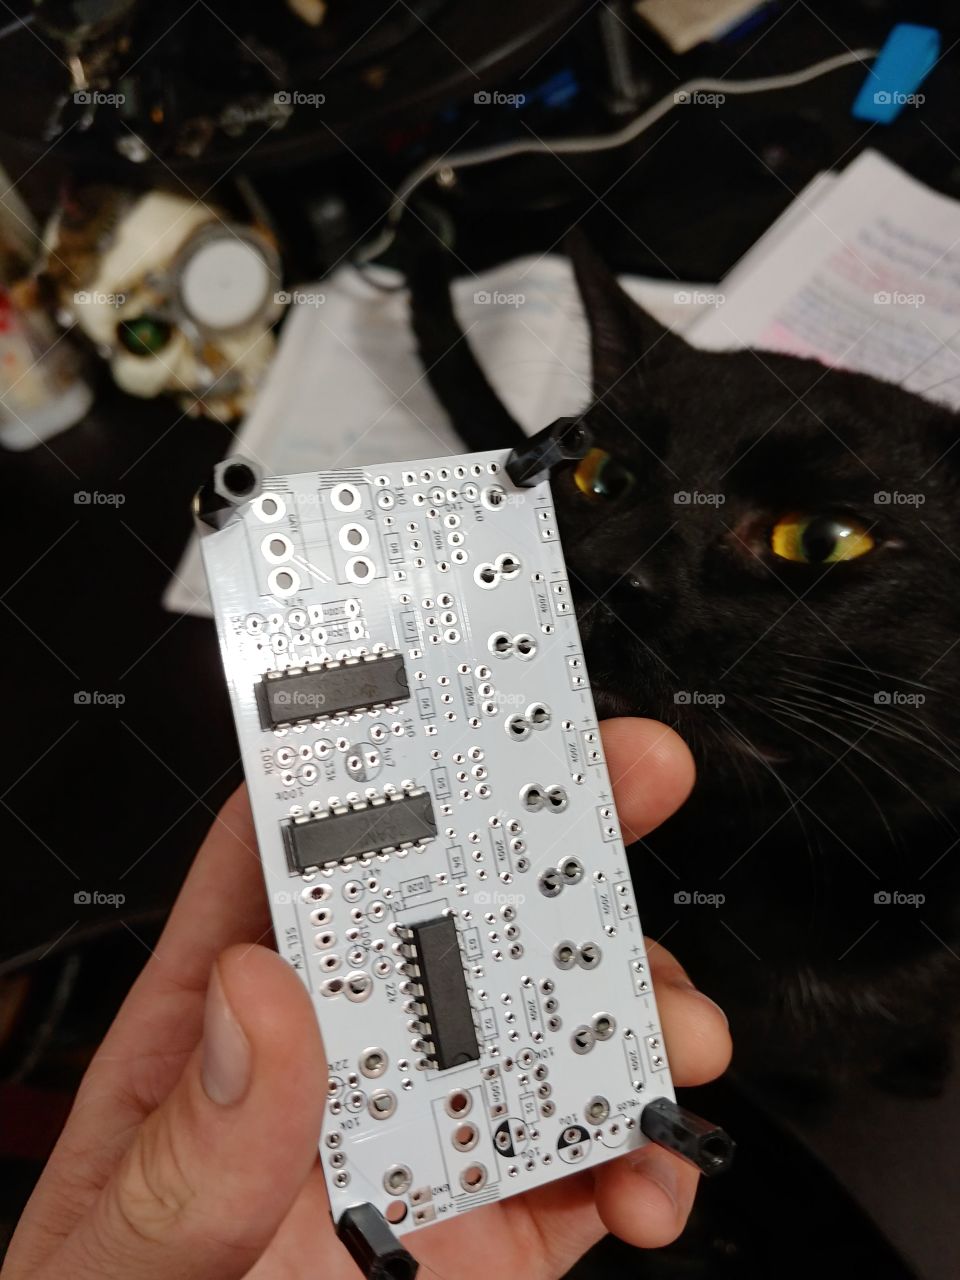 Behind the circuit veil, you will find a magical black cat!